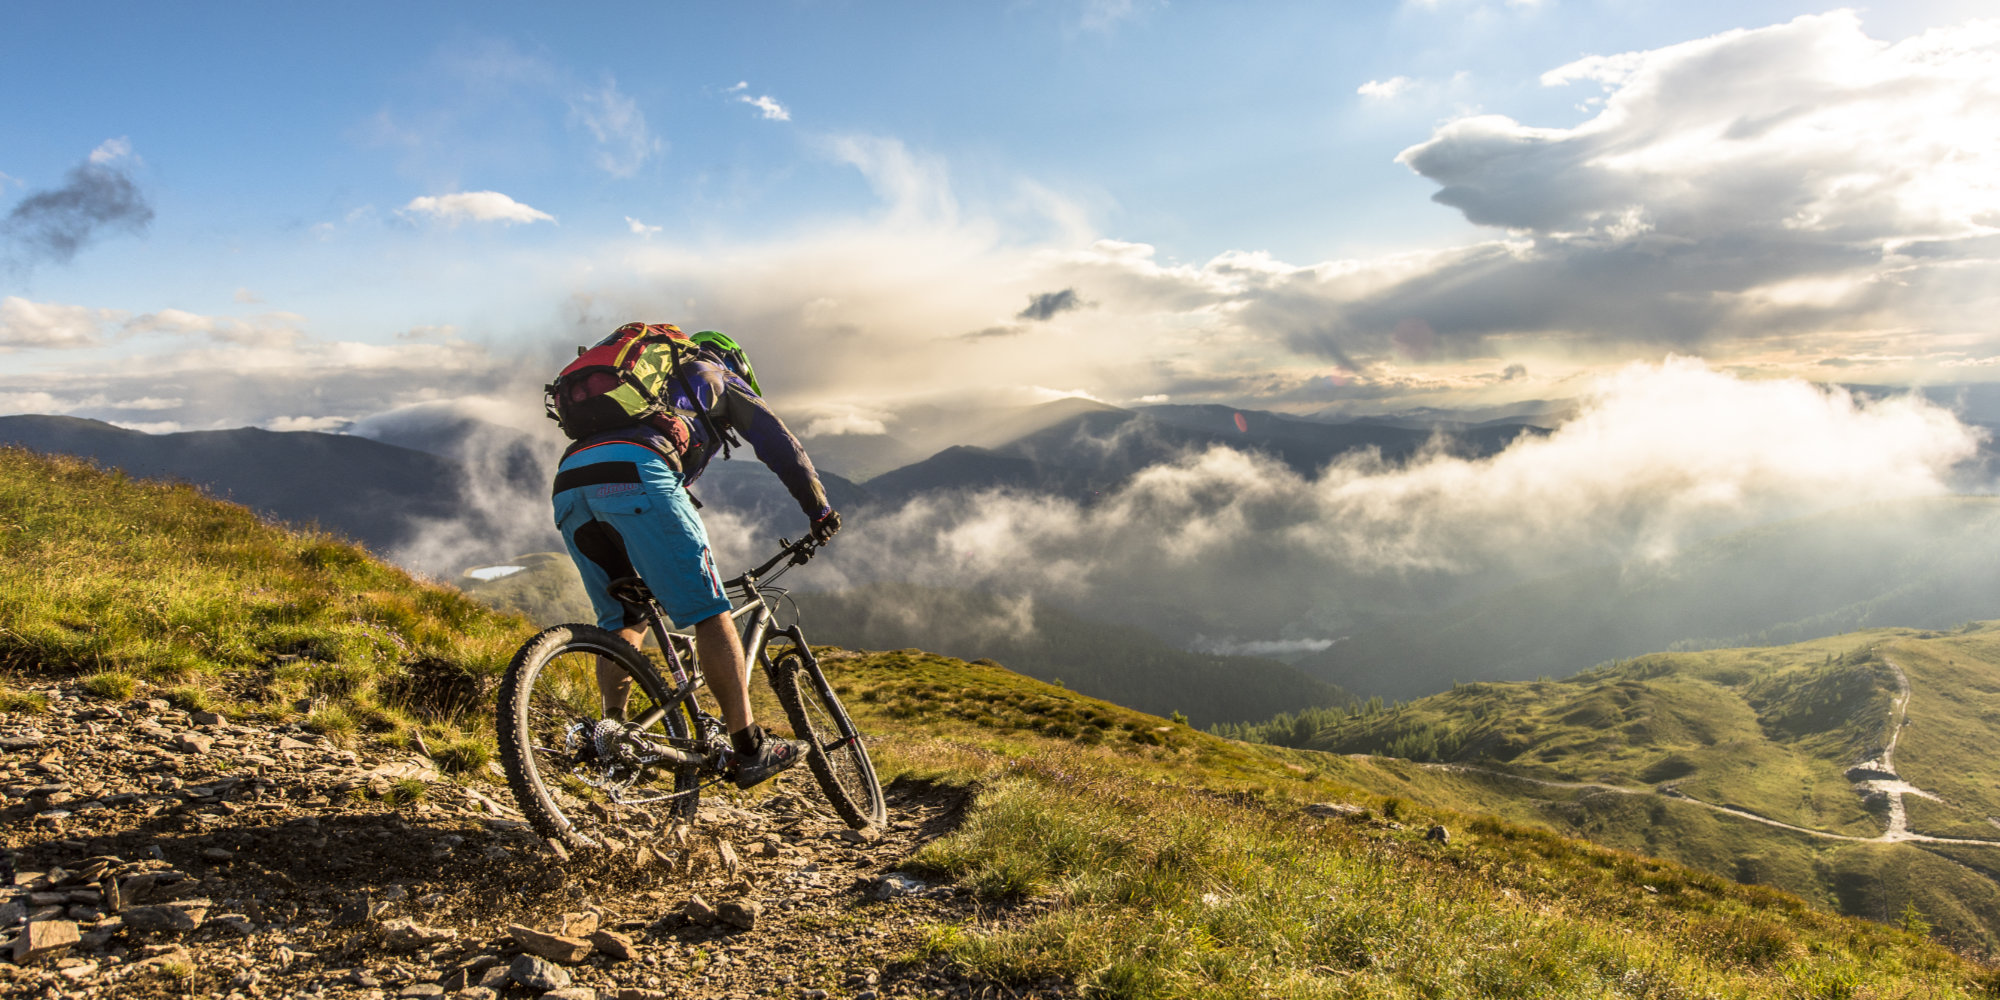 Man on his mountain bike in the mountains above the clouds.